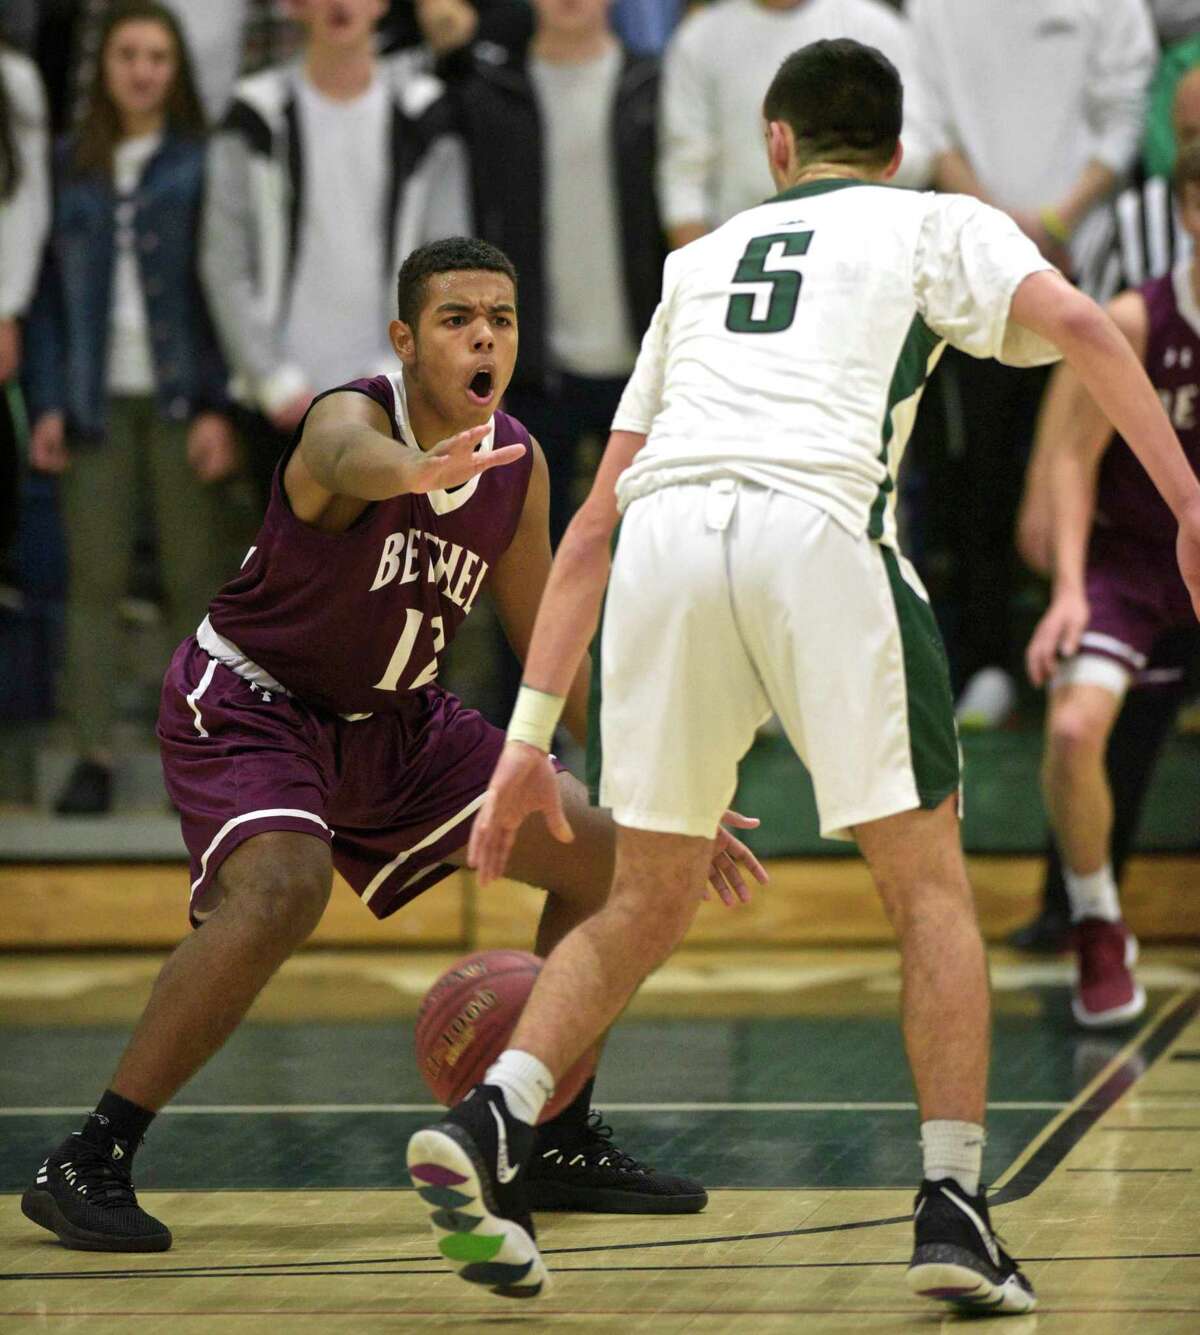 Bethel's Lorenzo Almonte (12) defends New Milford's John Fitzmaurice (5) in the boys basketball game between Bethel and New Milford high schools, Friday night, January 4, 2019, at New Milford High School, New Milford, Conn.